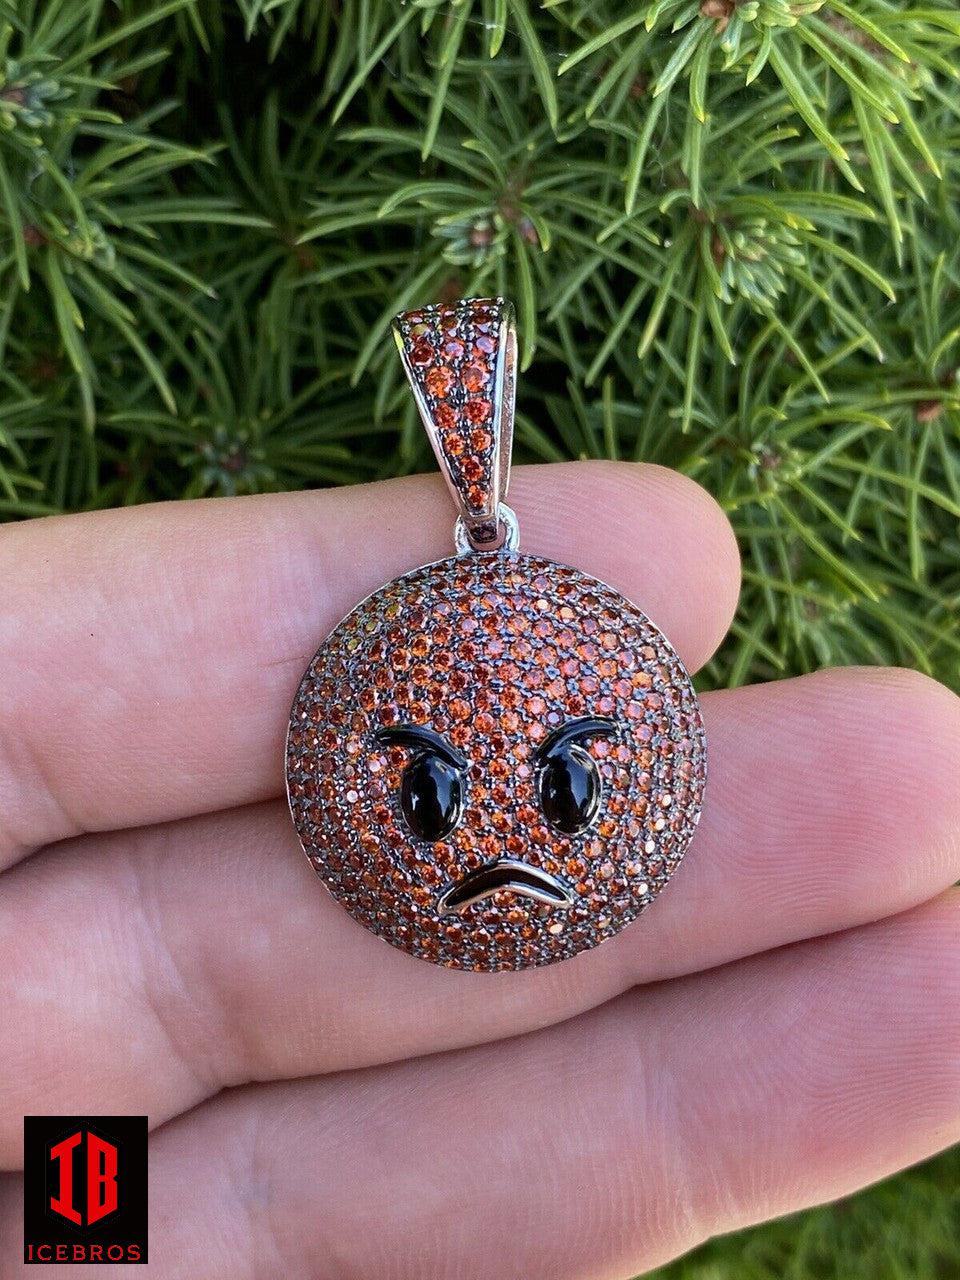 Angry Red Face Emoji Pendant Solid 925 Sterling Silver ICed Hip Hop Iced cz Diamond